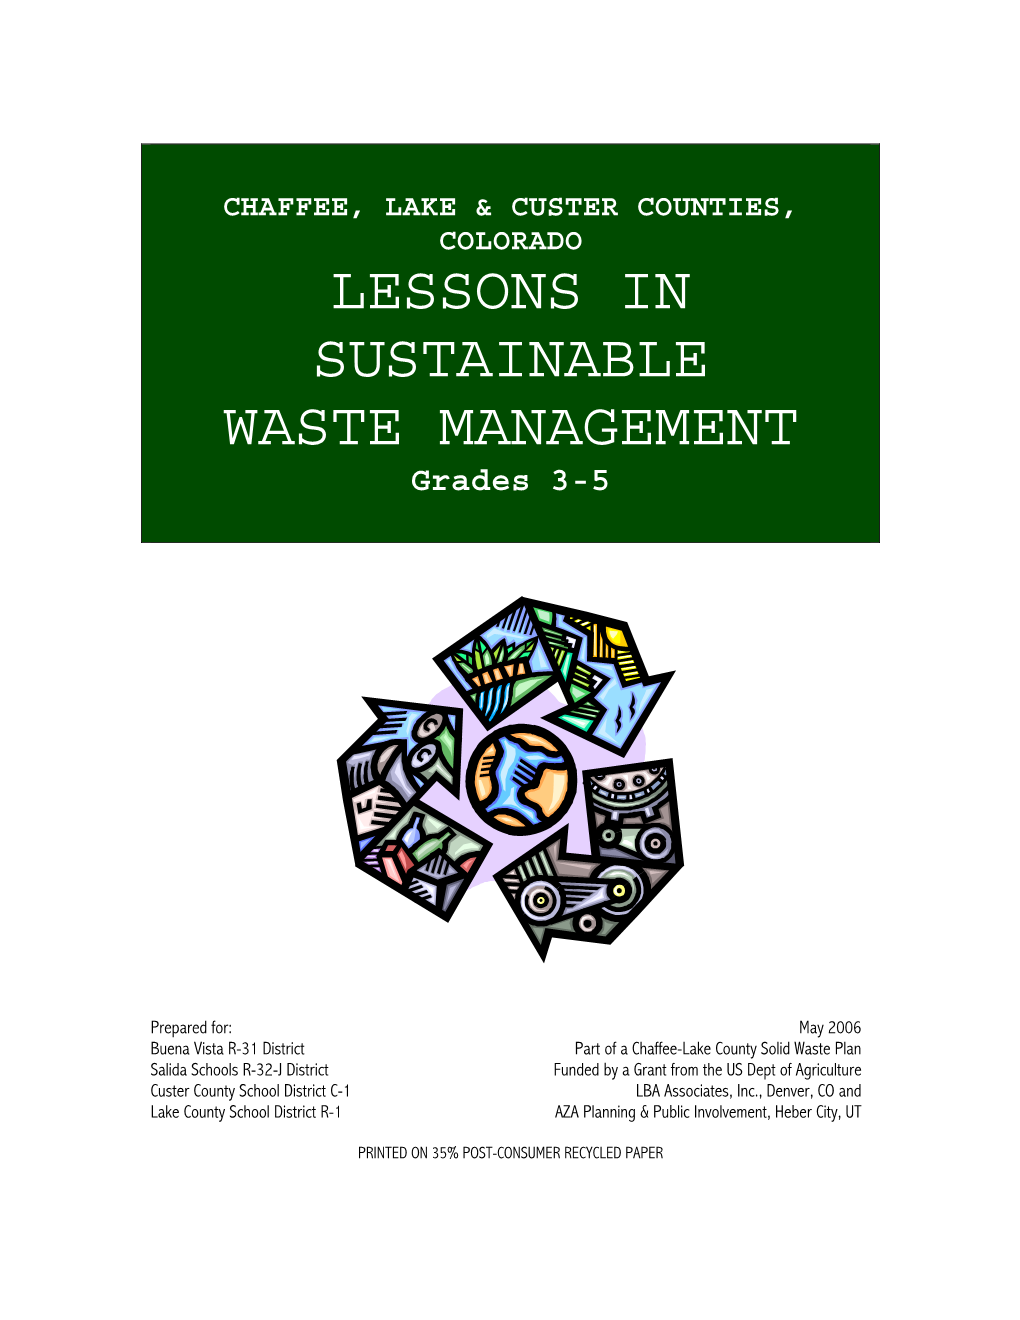 LESSONS in SUSTAINABLE WASTE MANAGEMENT Grades 3-5